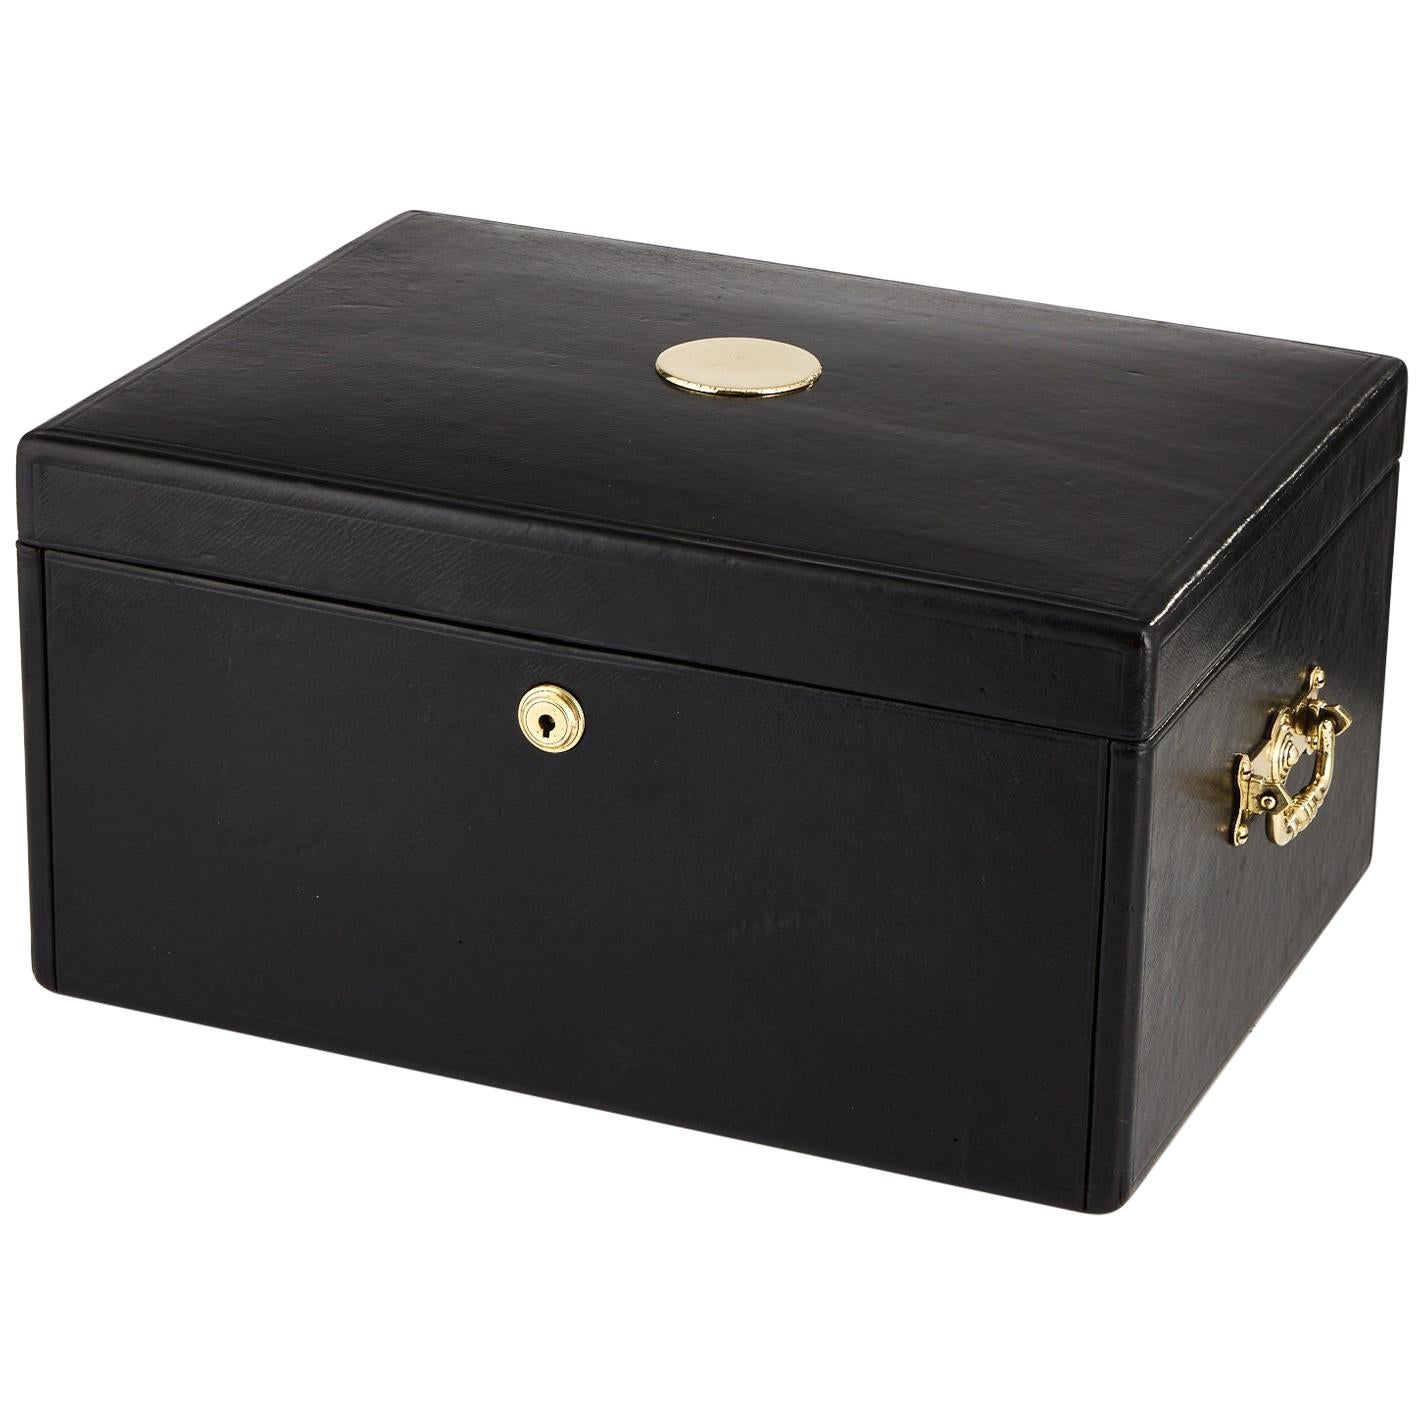 A stunning early 20th century black leather document box, circa 1910.
This box could serve as jewel box or for a watch collection having multiple lift out trays as shown, lined in suede and velvet.
The lid hinges completely back which acts as a